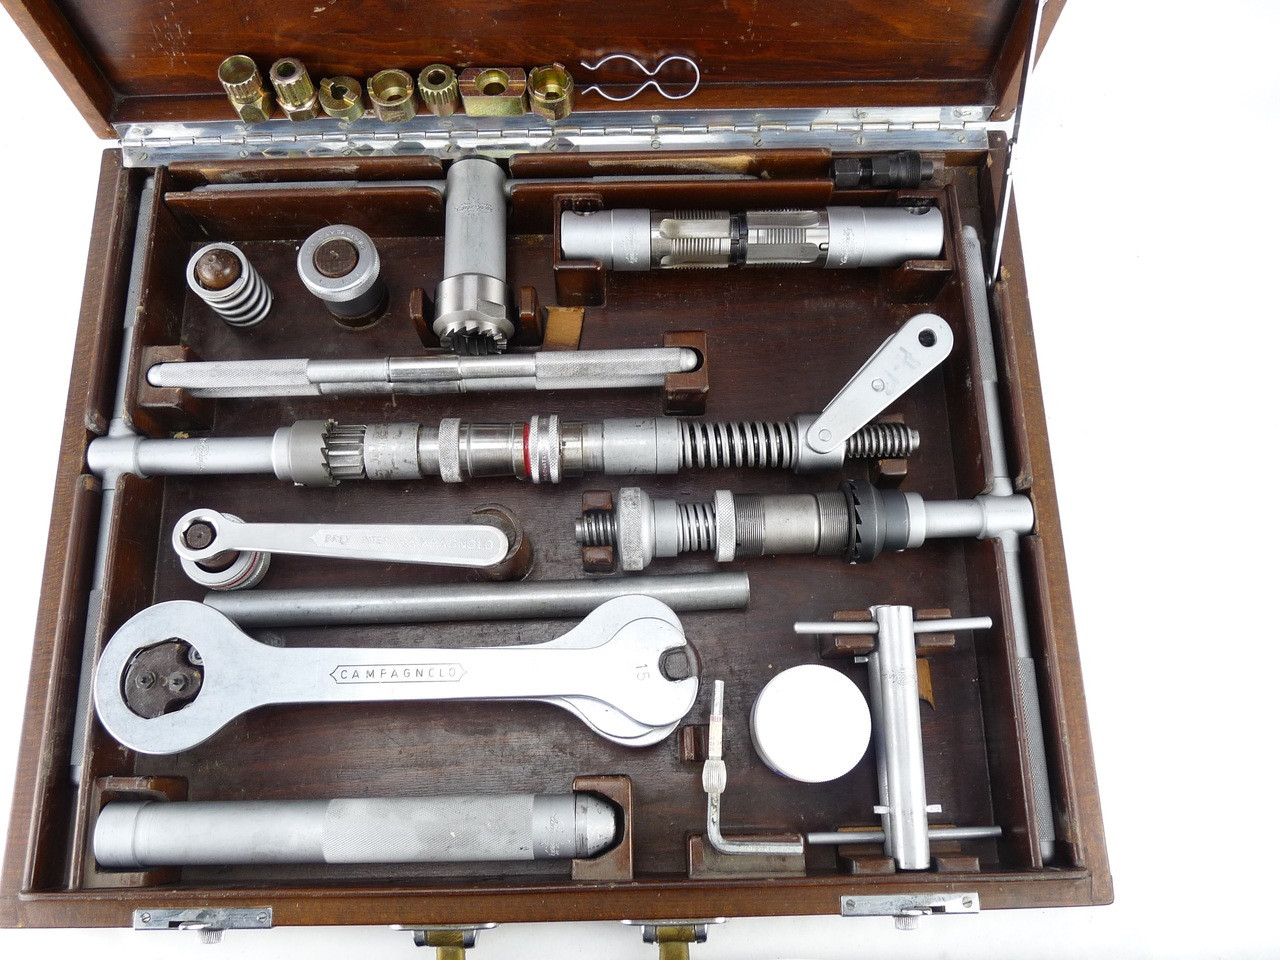 Campagnolo Tool kit